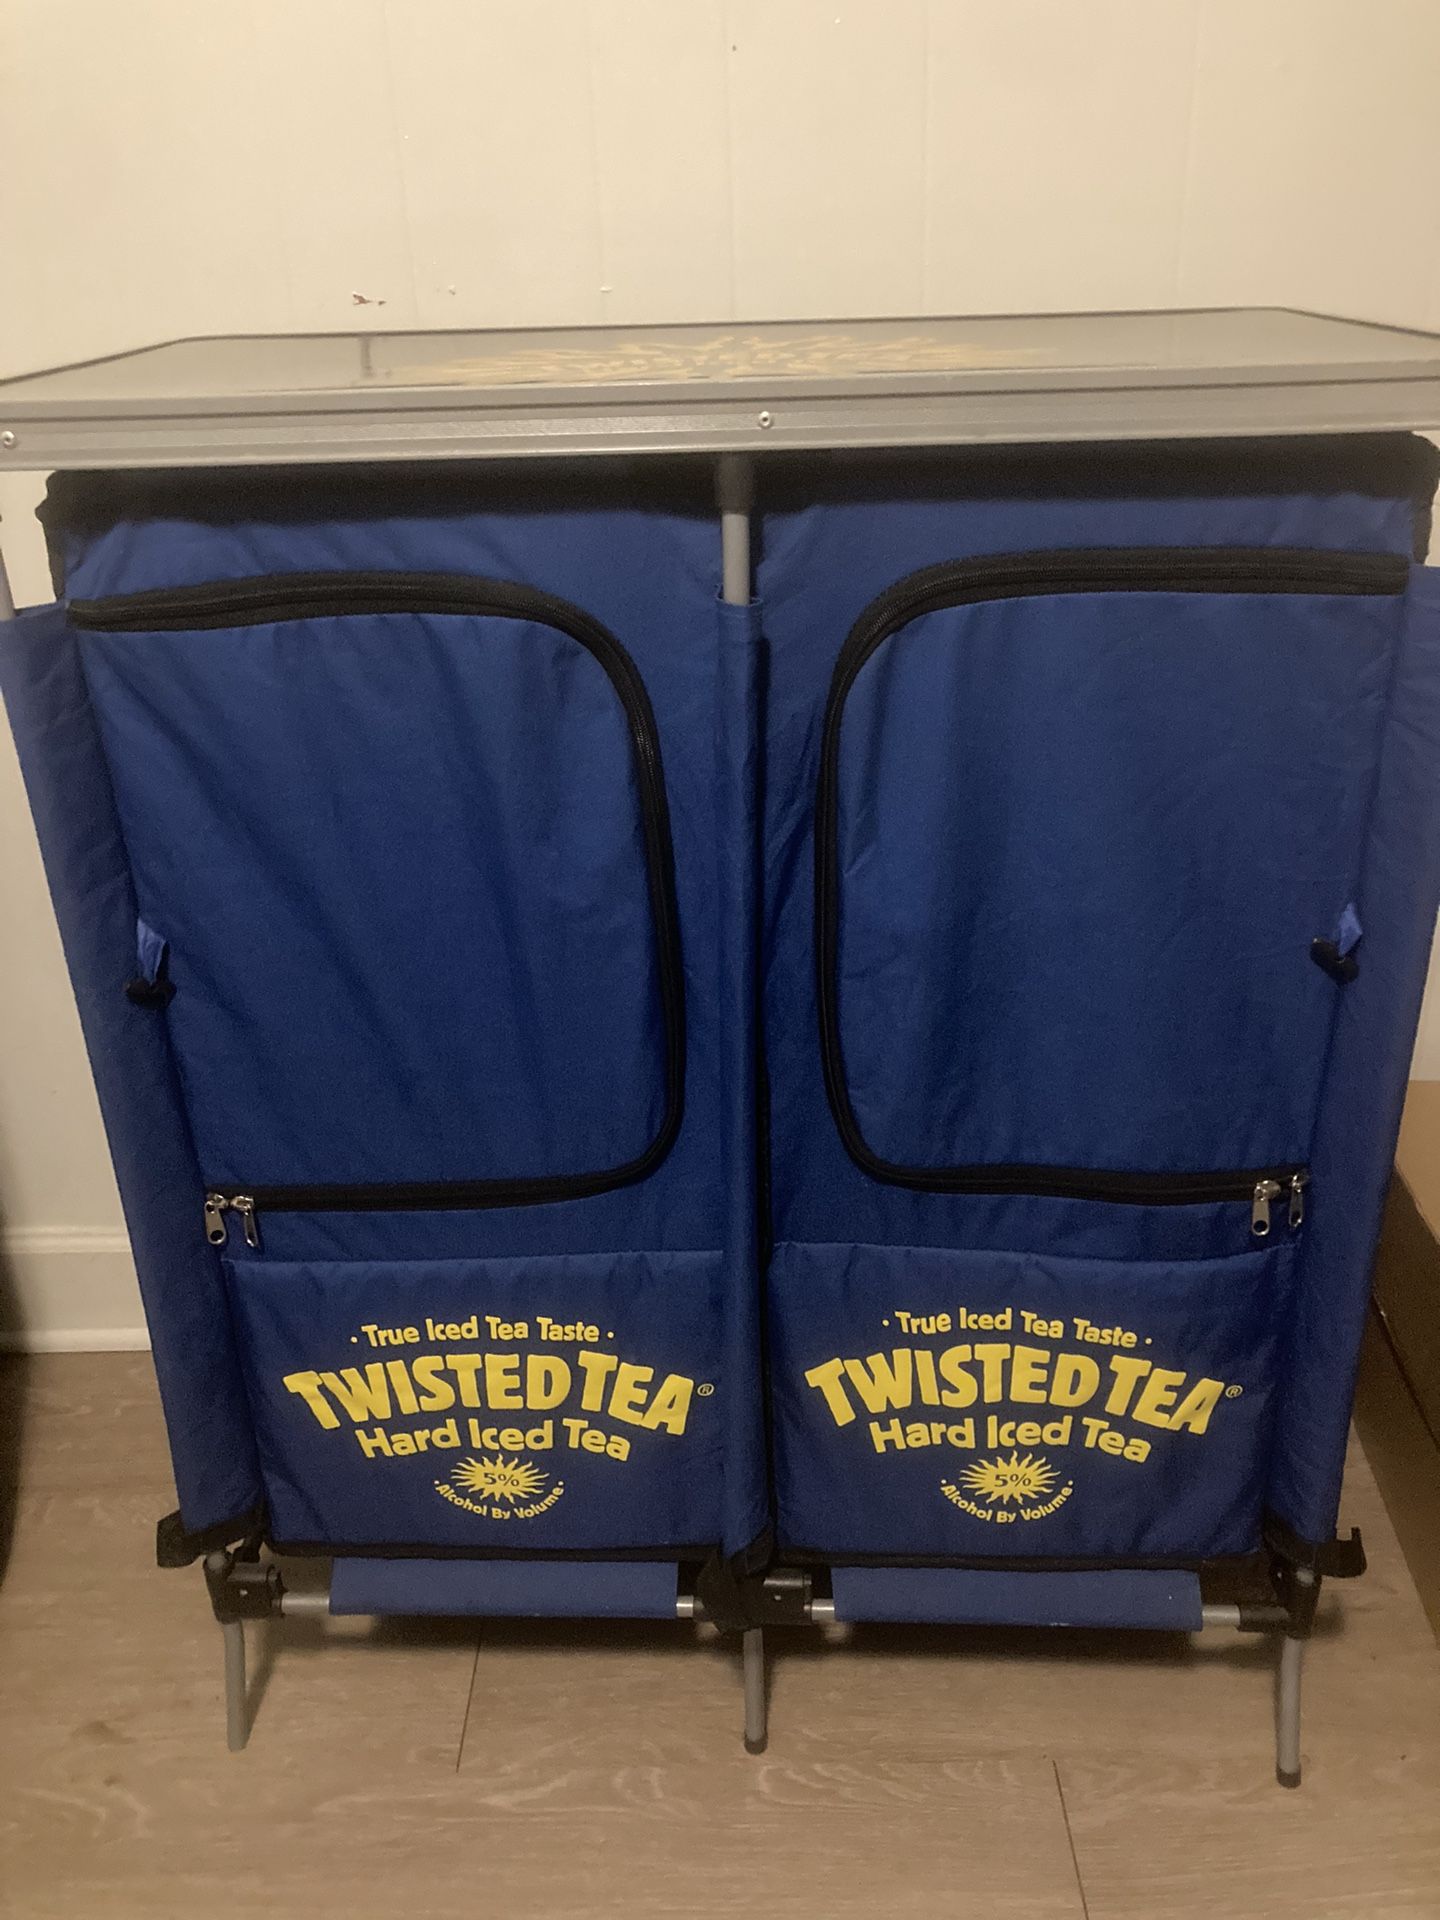 Twisted Tea Travel Bar With 2 Shelf Spaces And 2 Inside Coolers